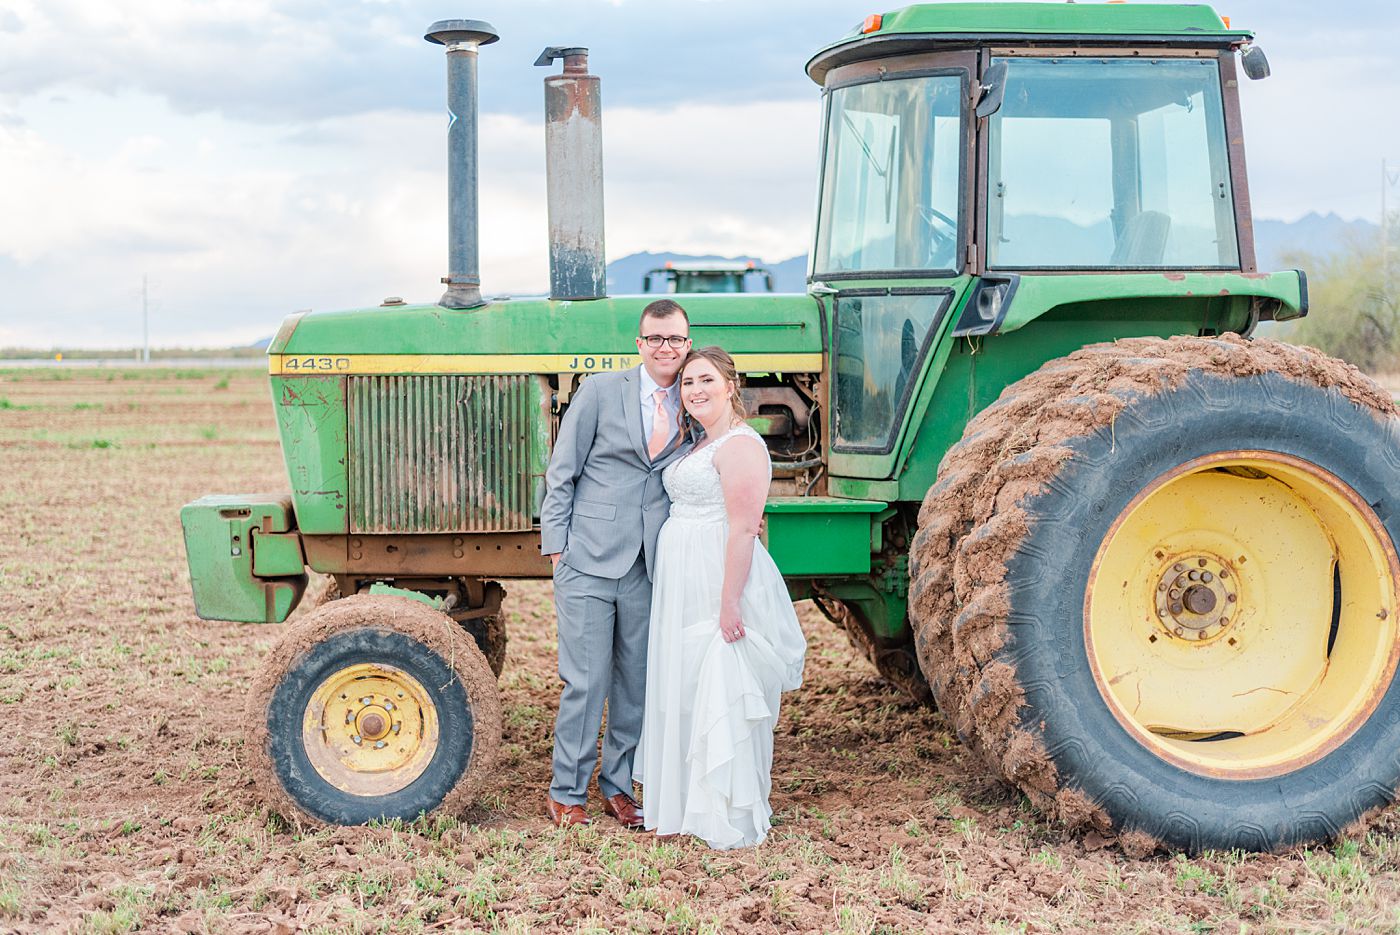 man in suit and woman in white dress standing by a green tractor